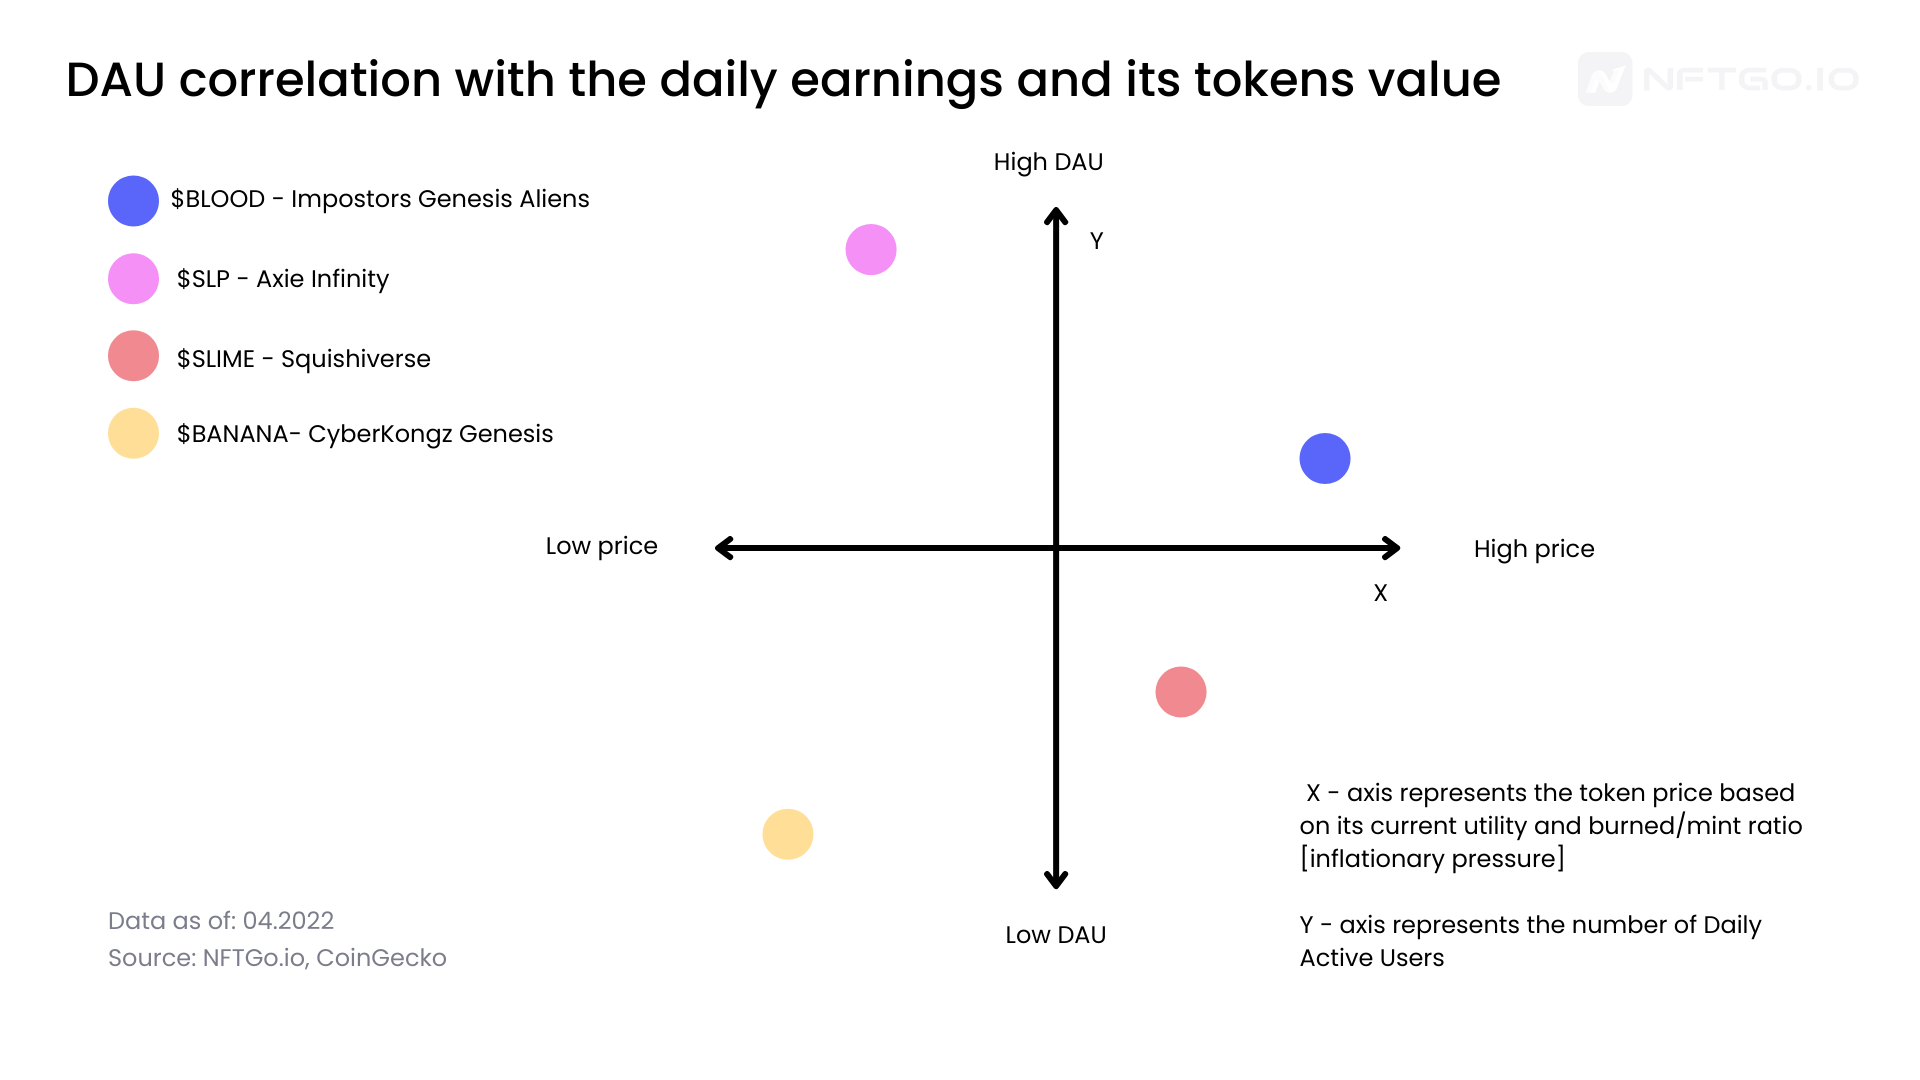 DAU correlation with the daily earnings and its token value. (Source: NFTGo.io, CoinGecko)